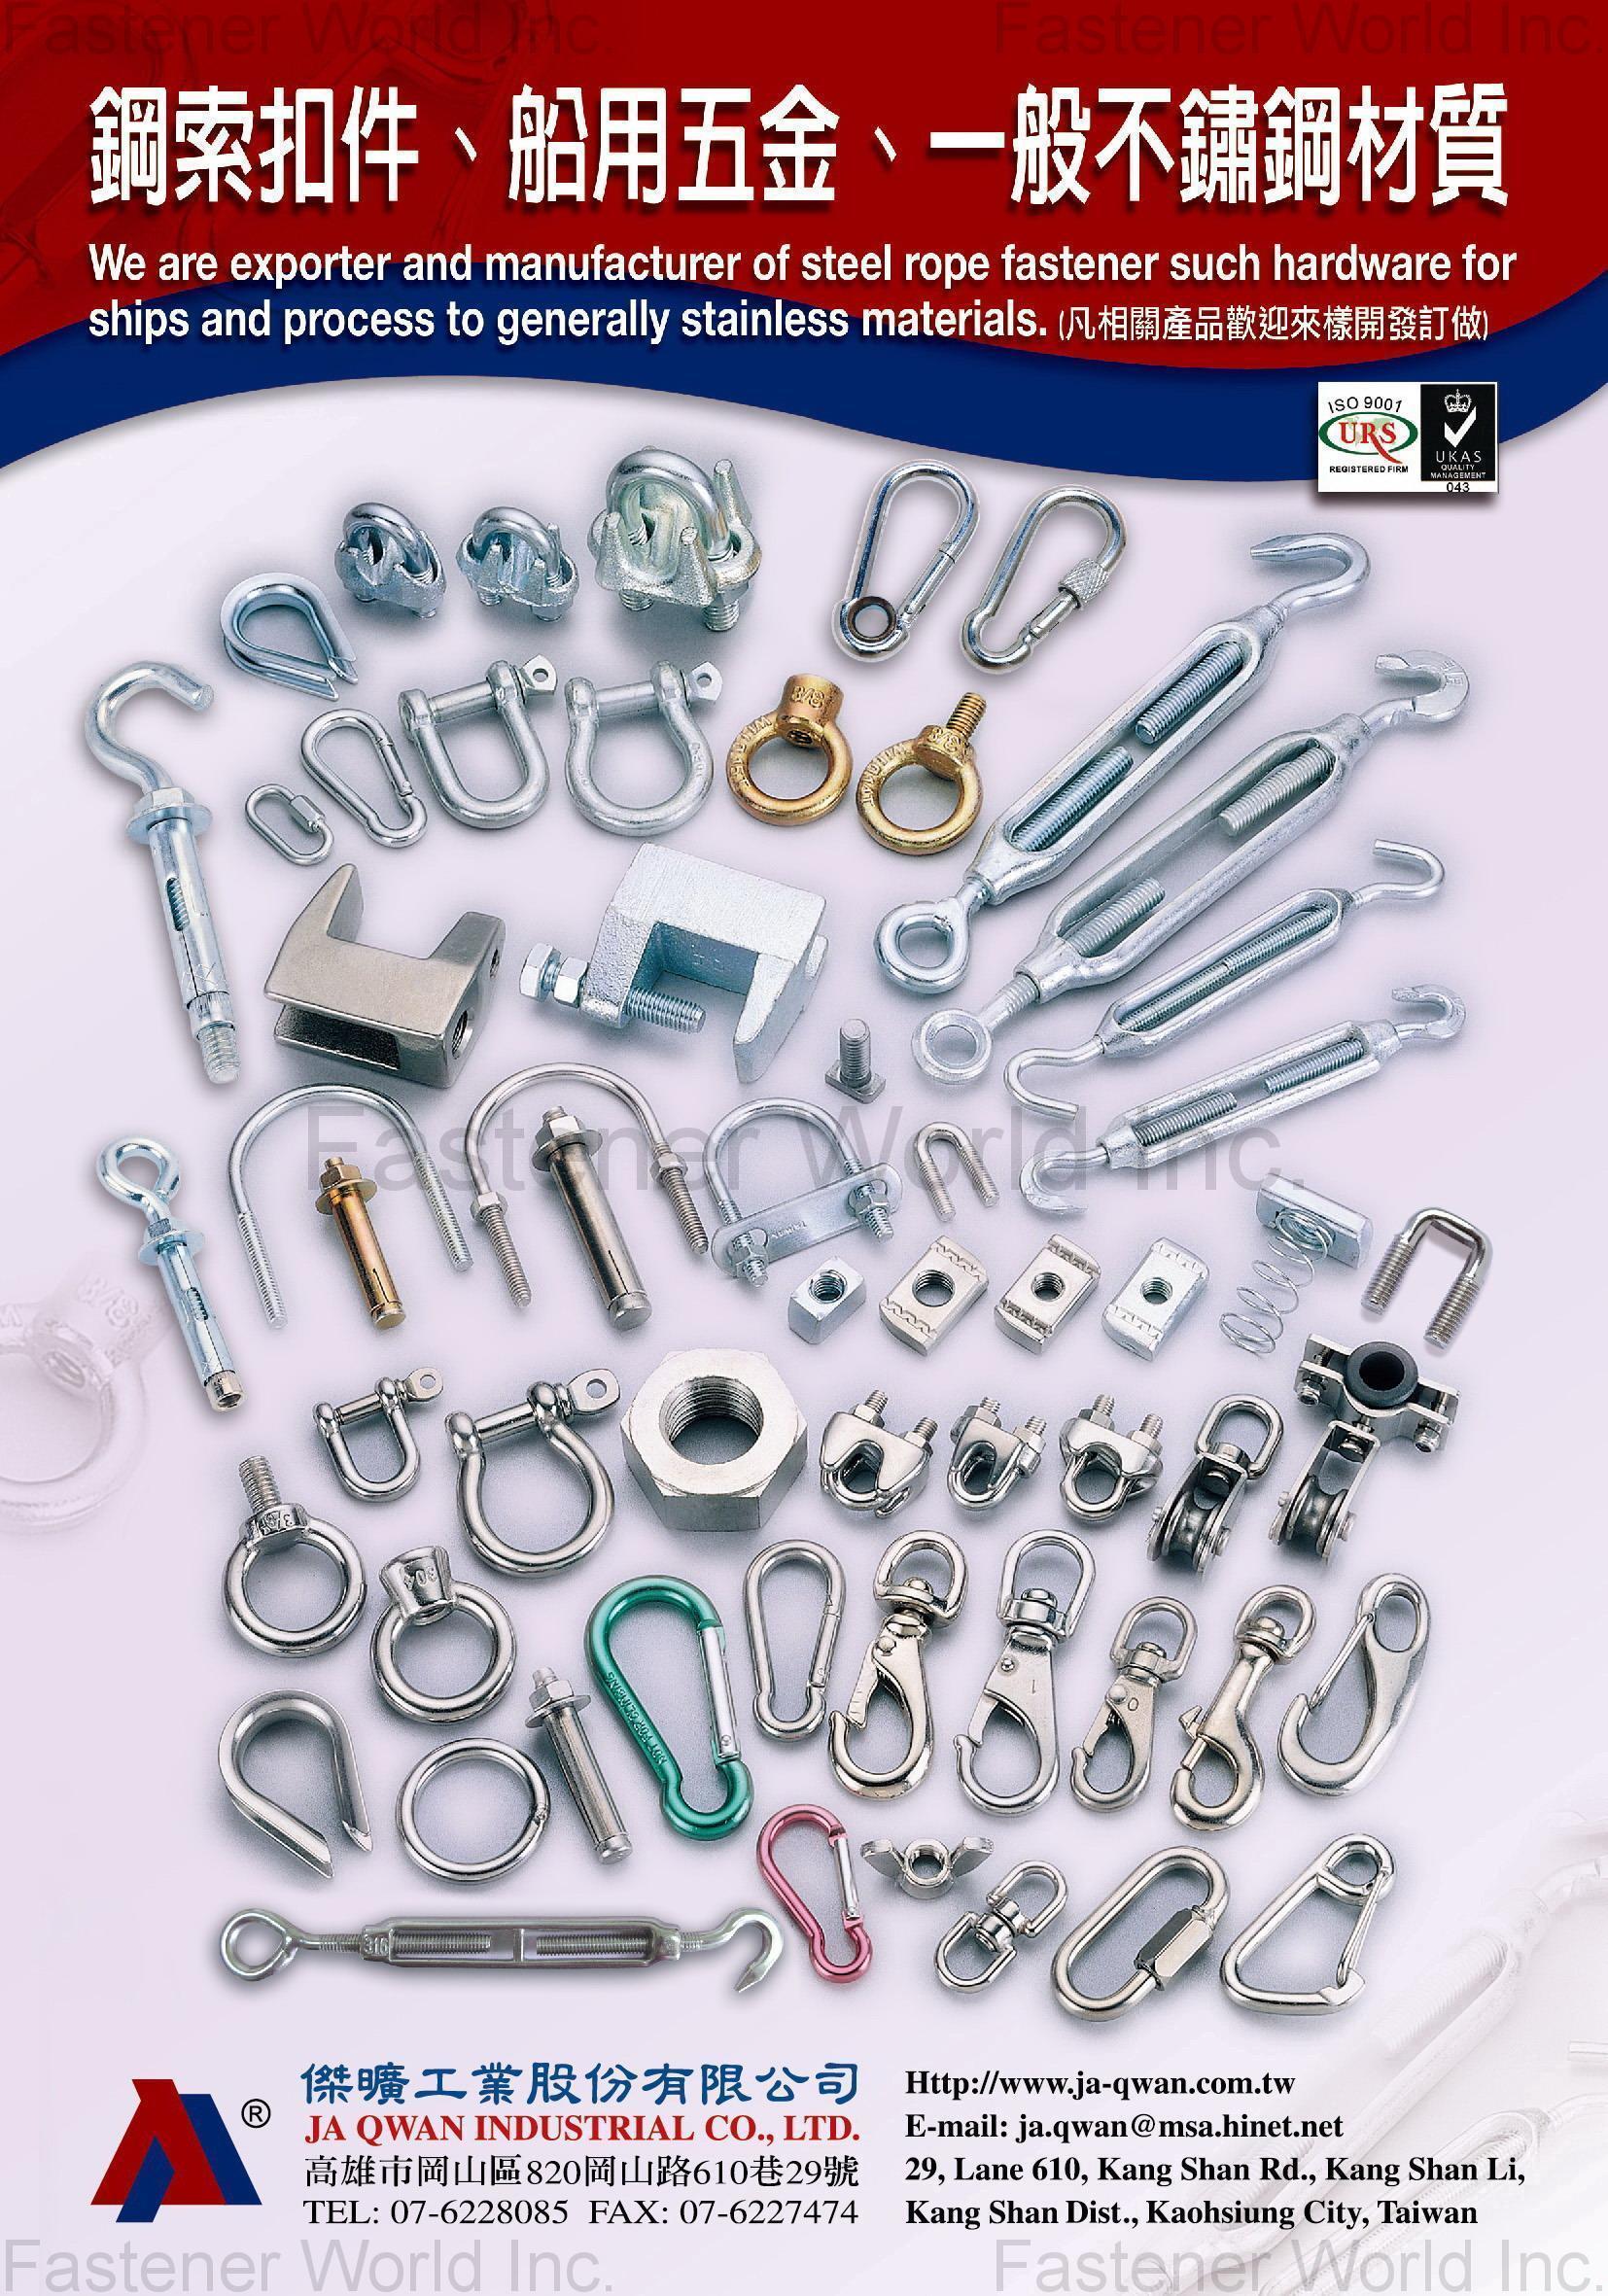 JA QWAN INDUSTRIAL CO., LTD. , Steel Rope Fastener Such Hardware For Ships And Process To Generally Stainless Materials , Other Hardware Equipment / Accessories / Products